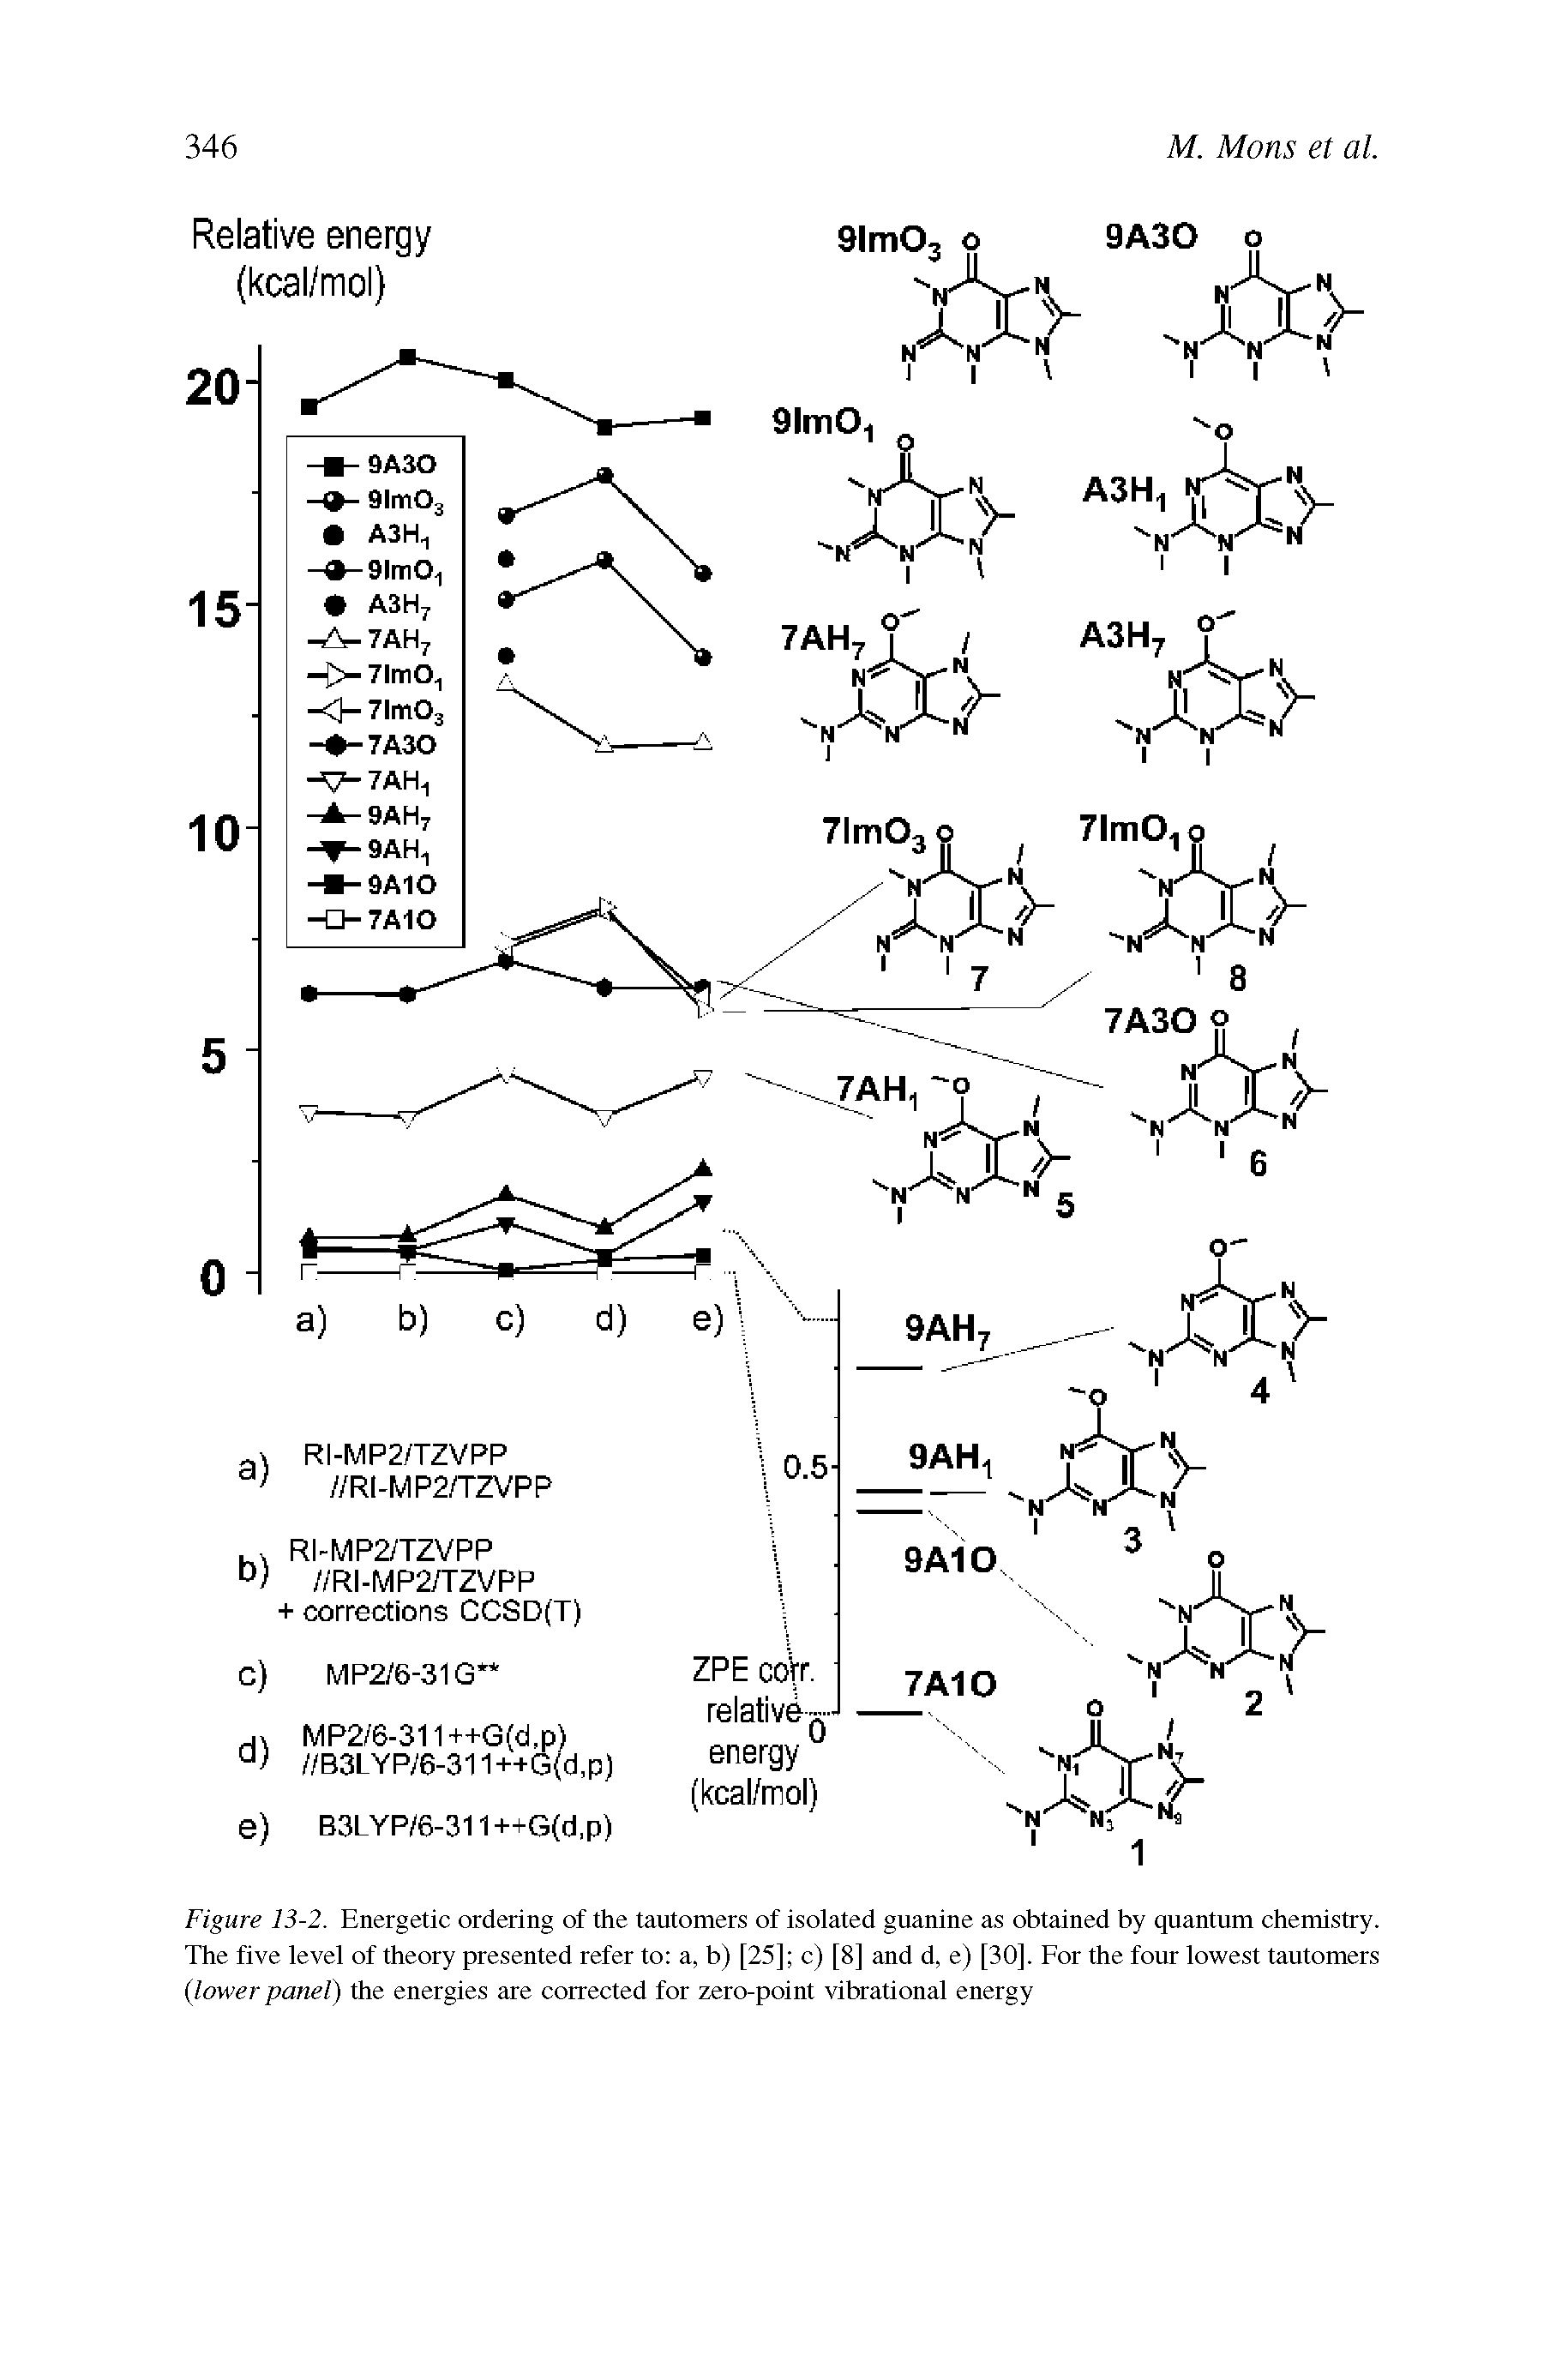 Figure 13-2. Energetic ordering of the tautomers of isolated guanine as obtained by quantum chemistry. The five level of theory presented refer to a, b) [25] c) [8] and d, e) [30]. For the four lowest tautomers (lower panel) the energies are corrected for zero-point vibrational energy...